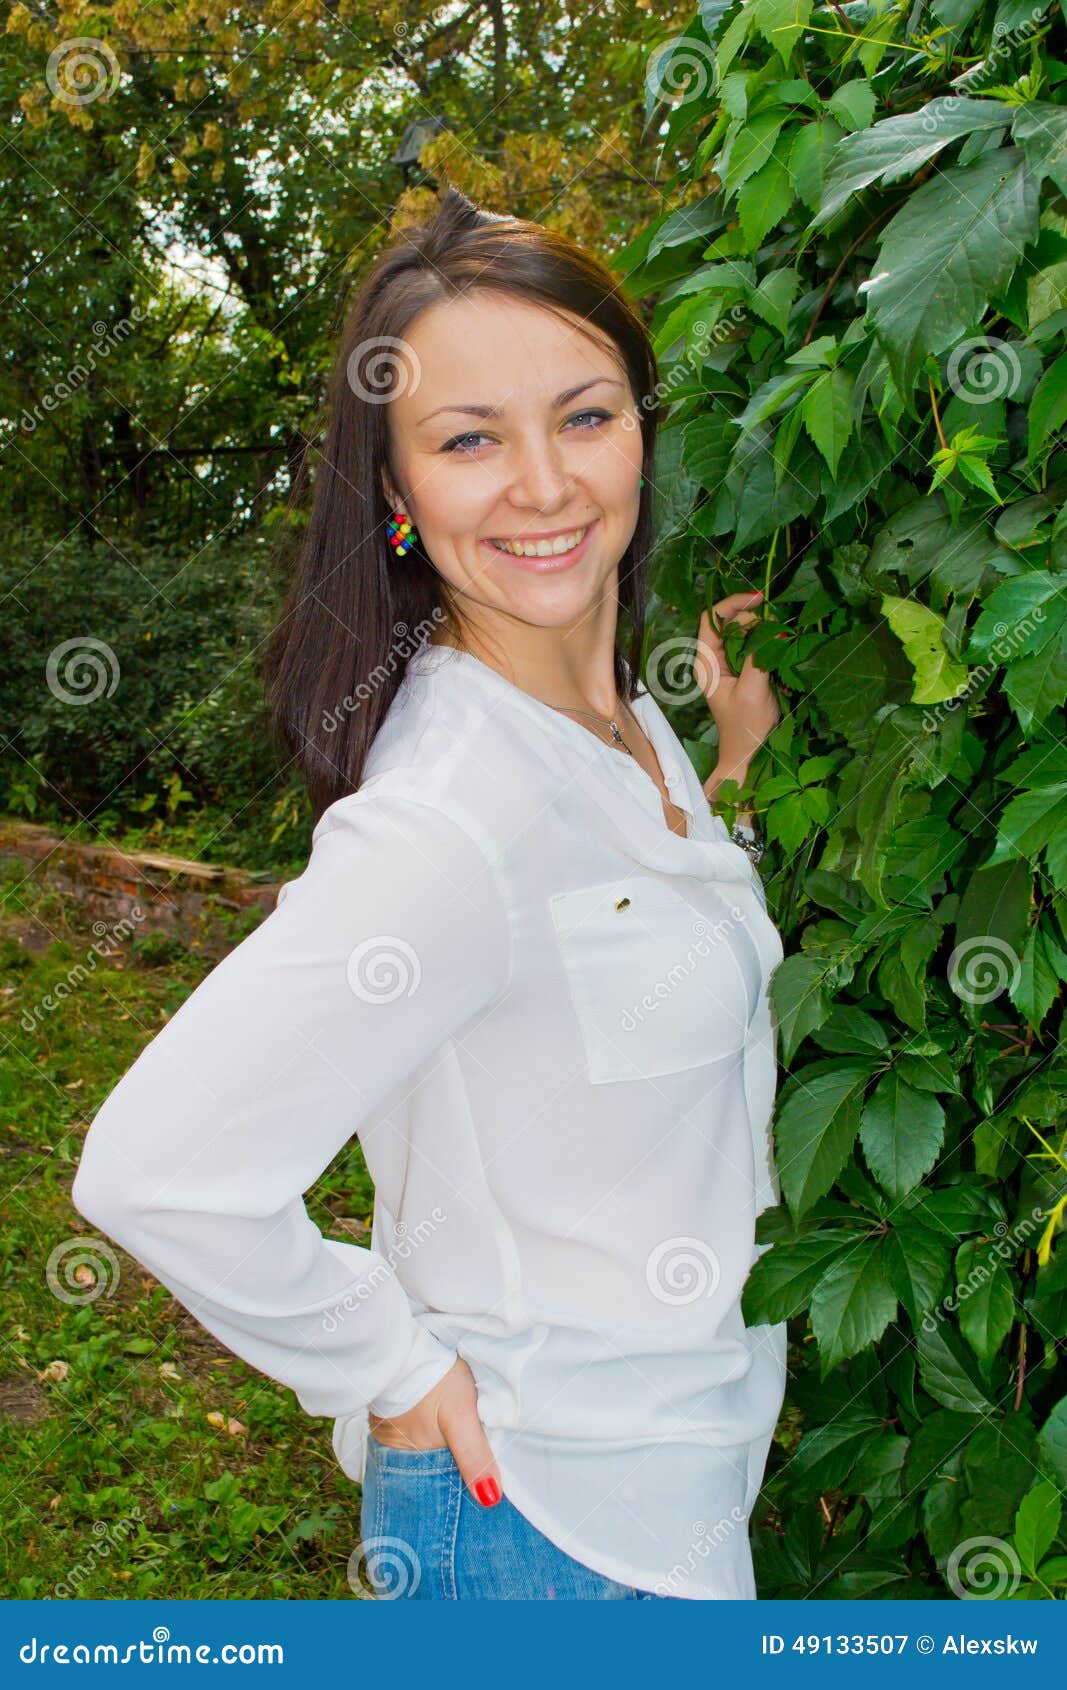 Girl Surrounded by Greenery Stock Image - Image of carefree, easy: 49133507